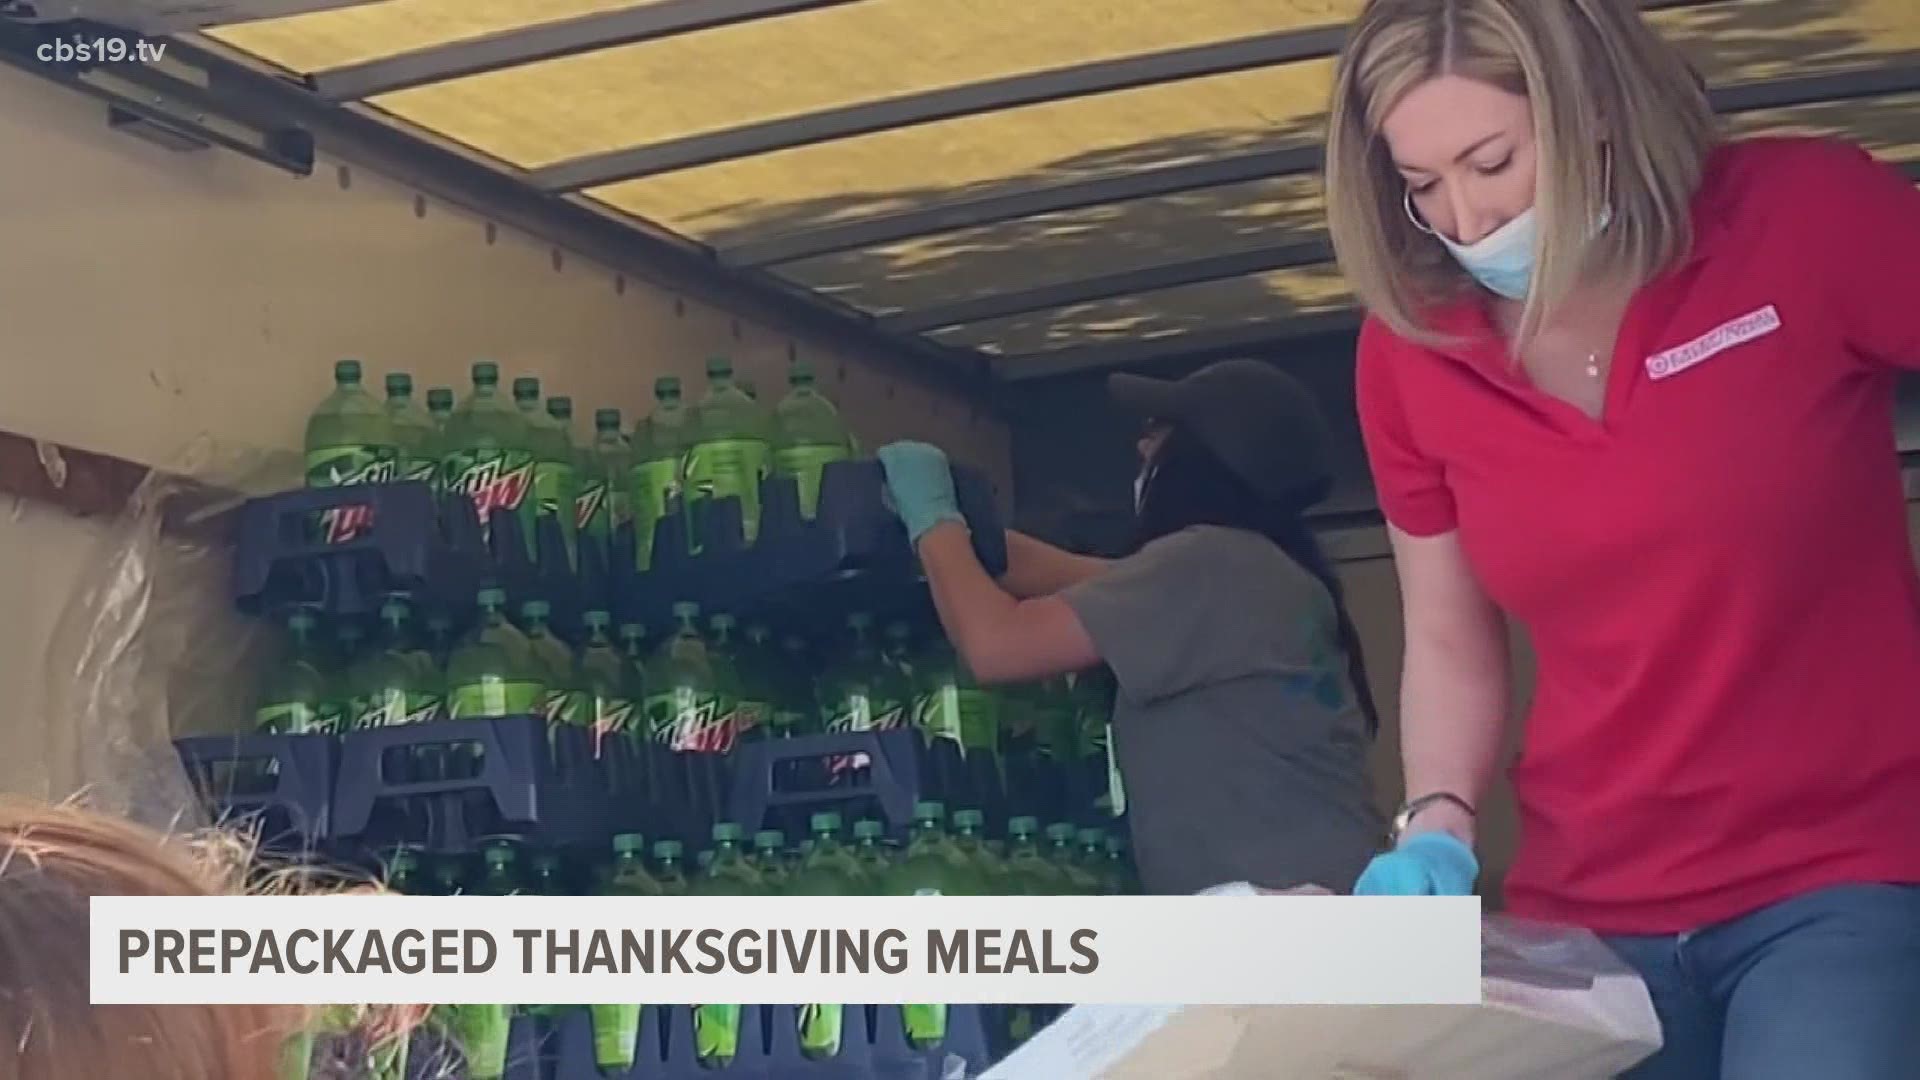 150 families can breathe a little easier this Thanksgiving knowing that their meal is covered.